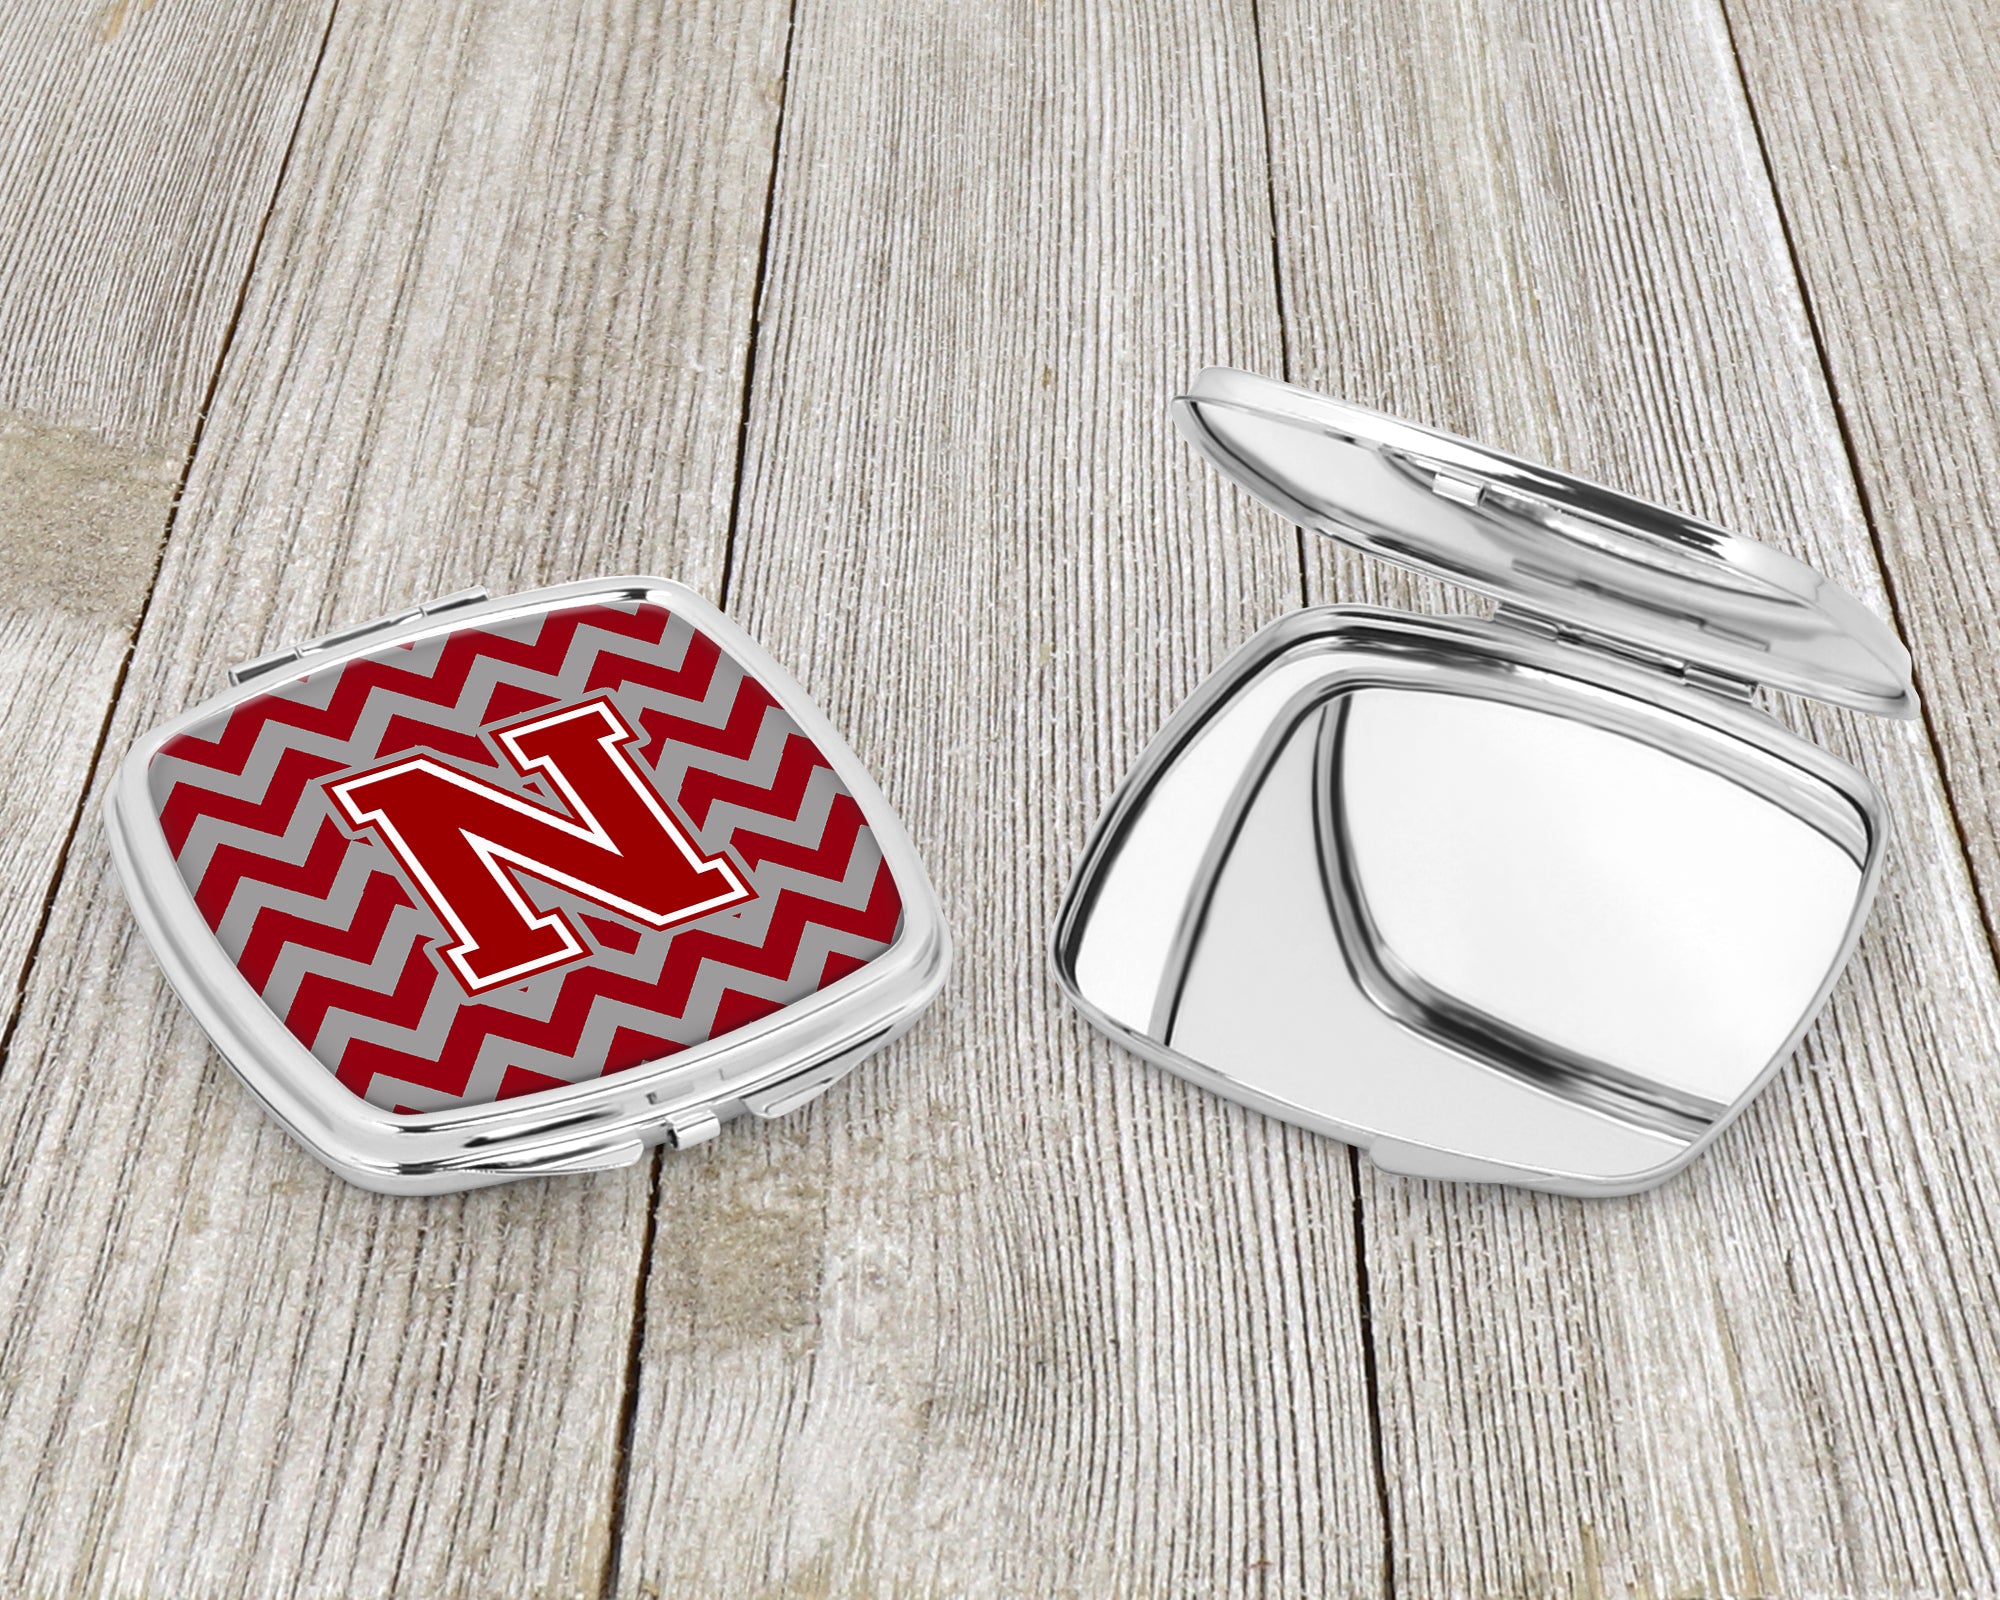 Letter N Chevron Maroon and White Compact Mirror CJ1049-NSCM  the-store.com.